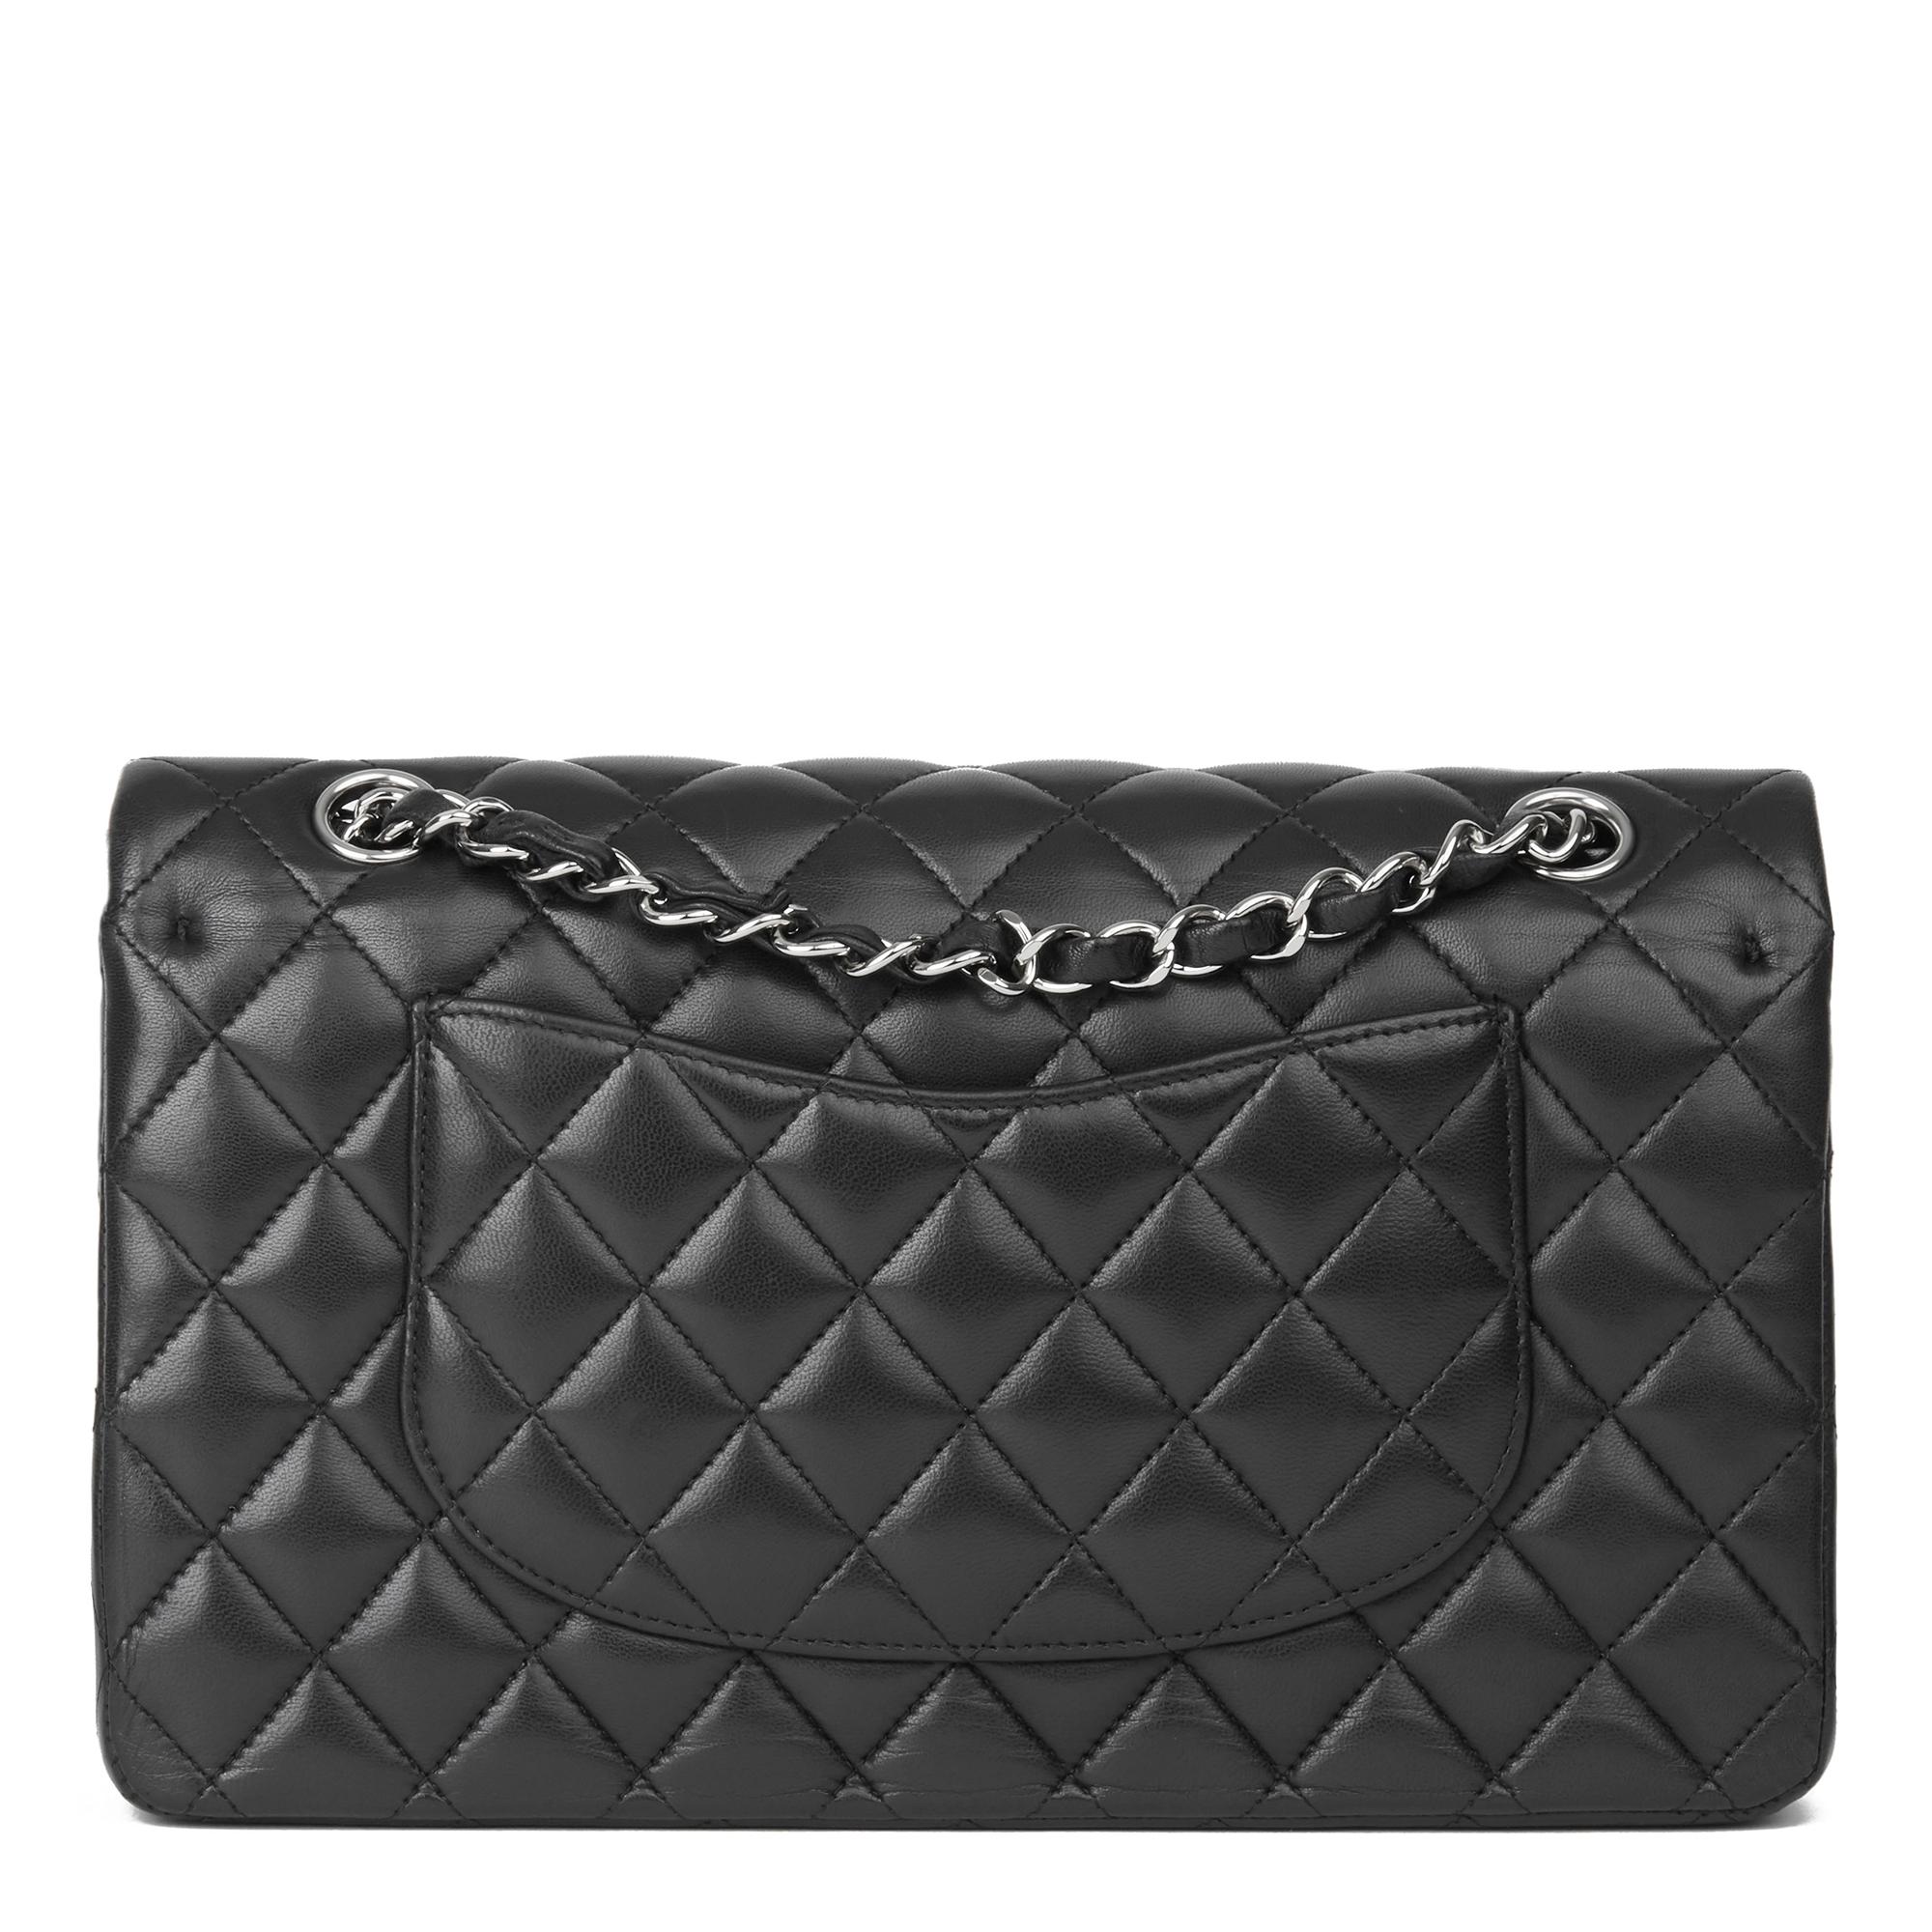 Women's 2012 Chanel Black Quilted Lambskin Medium Classic Double Flap Bag 